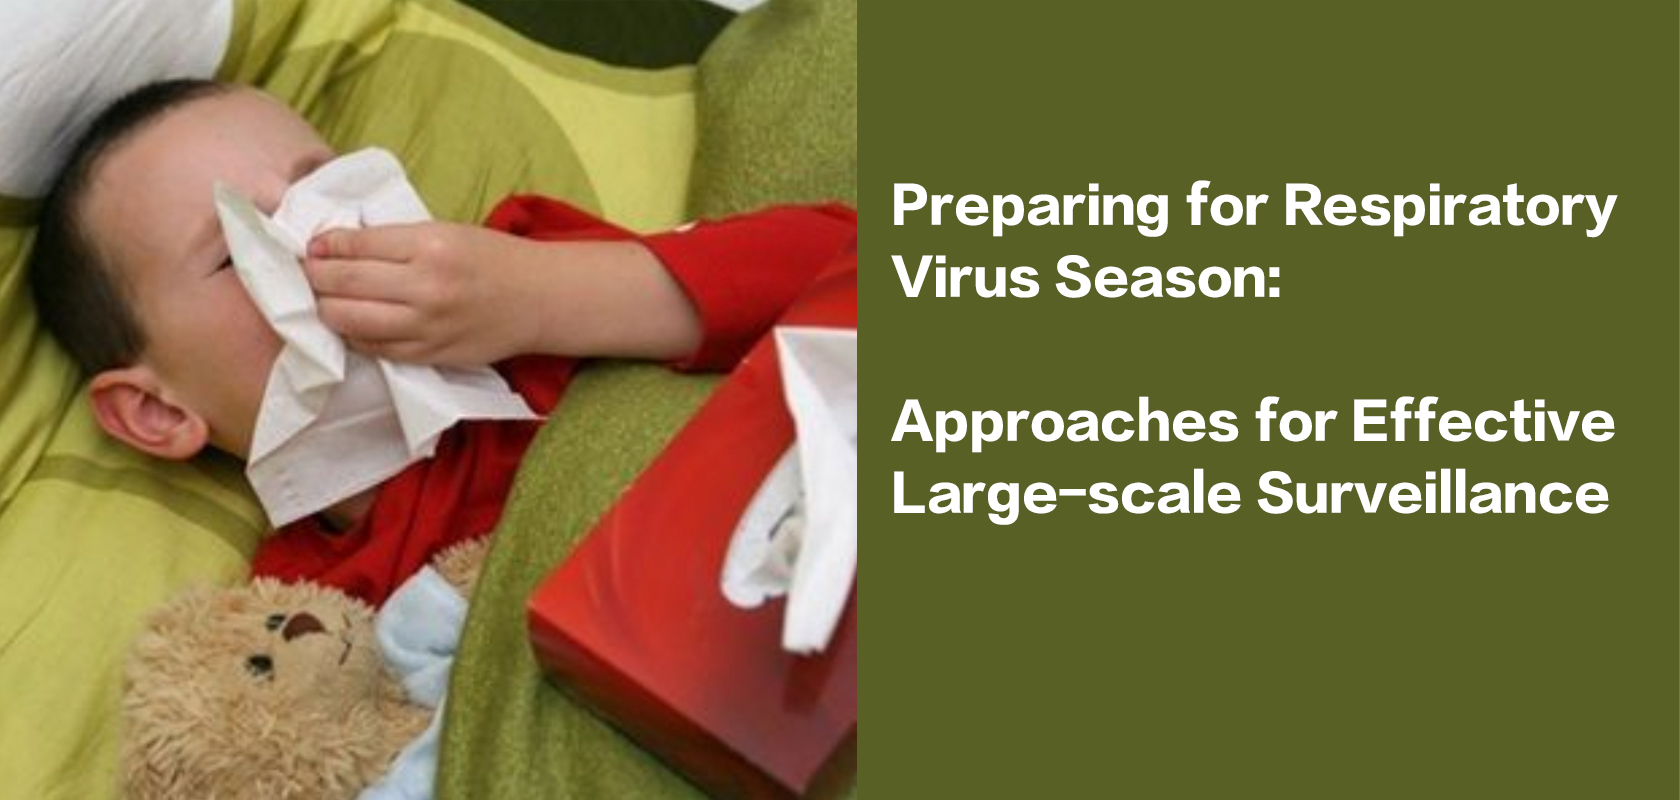 Preparing for Respiratory Virus Season: Approaches for Effective Large-scale Surveillance